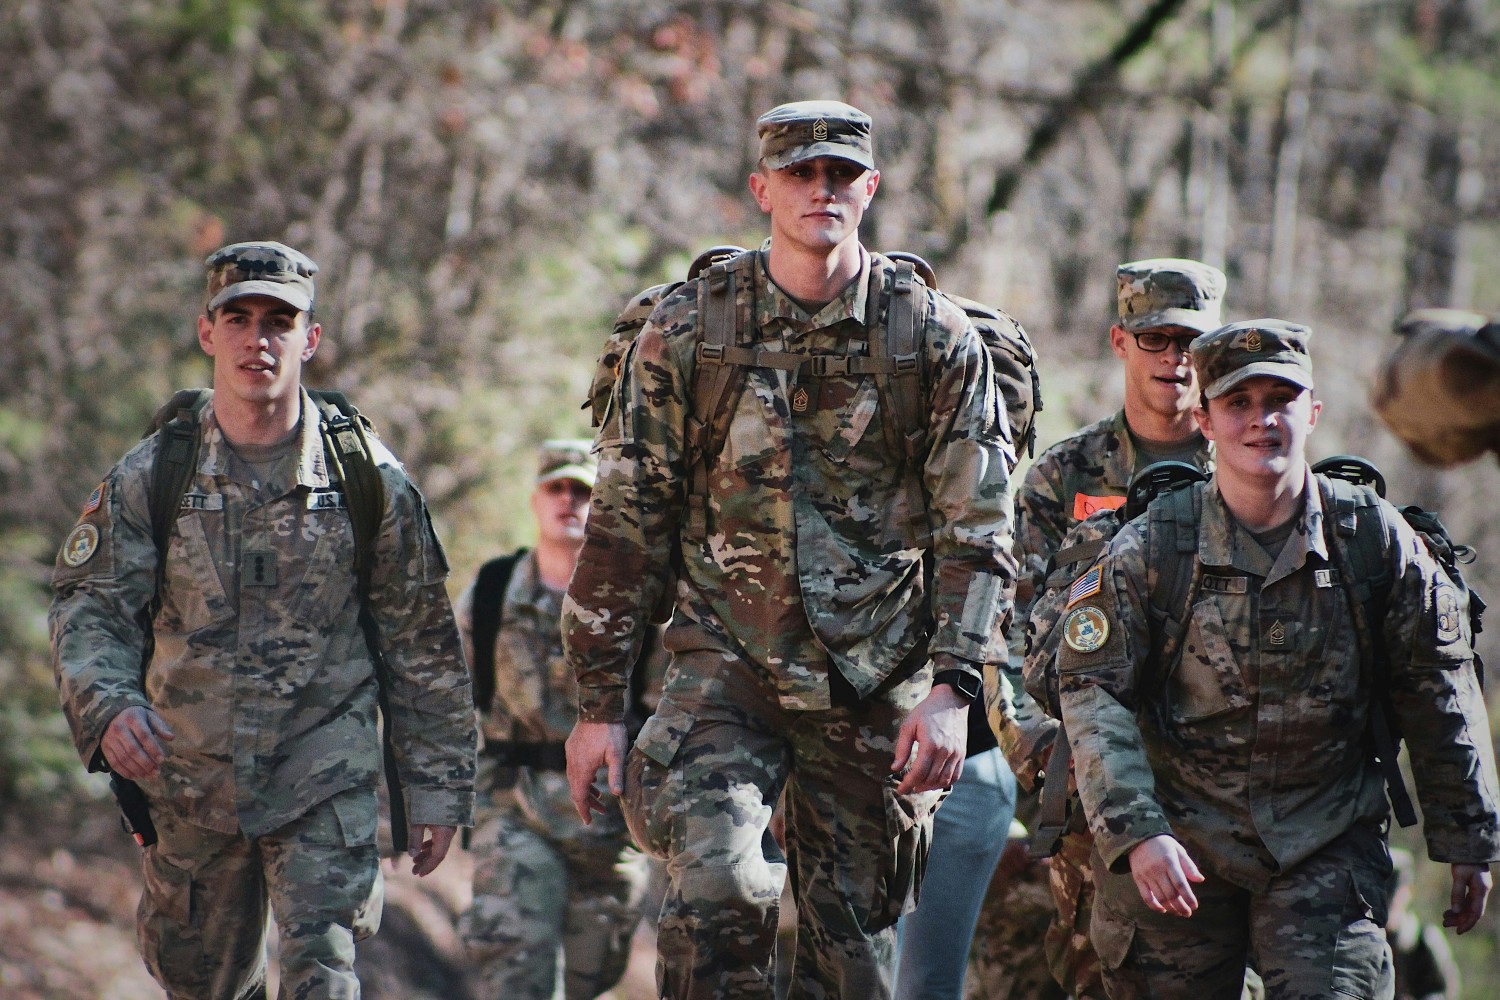 men in camouflage military uniform walking through a field